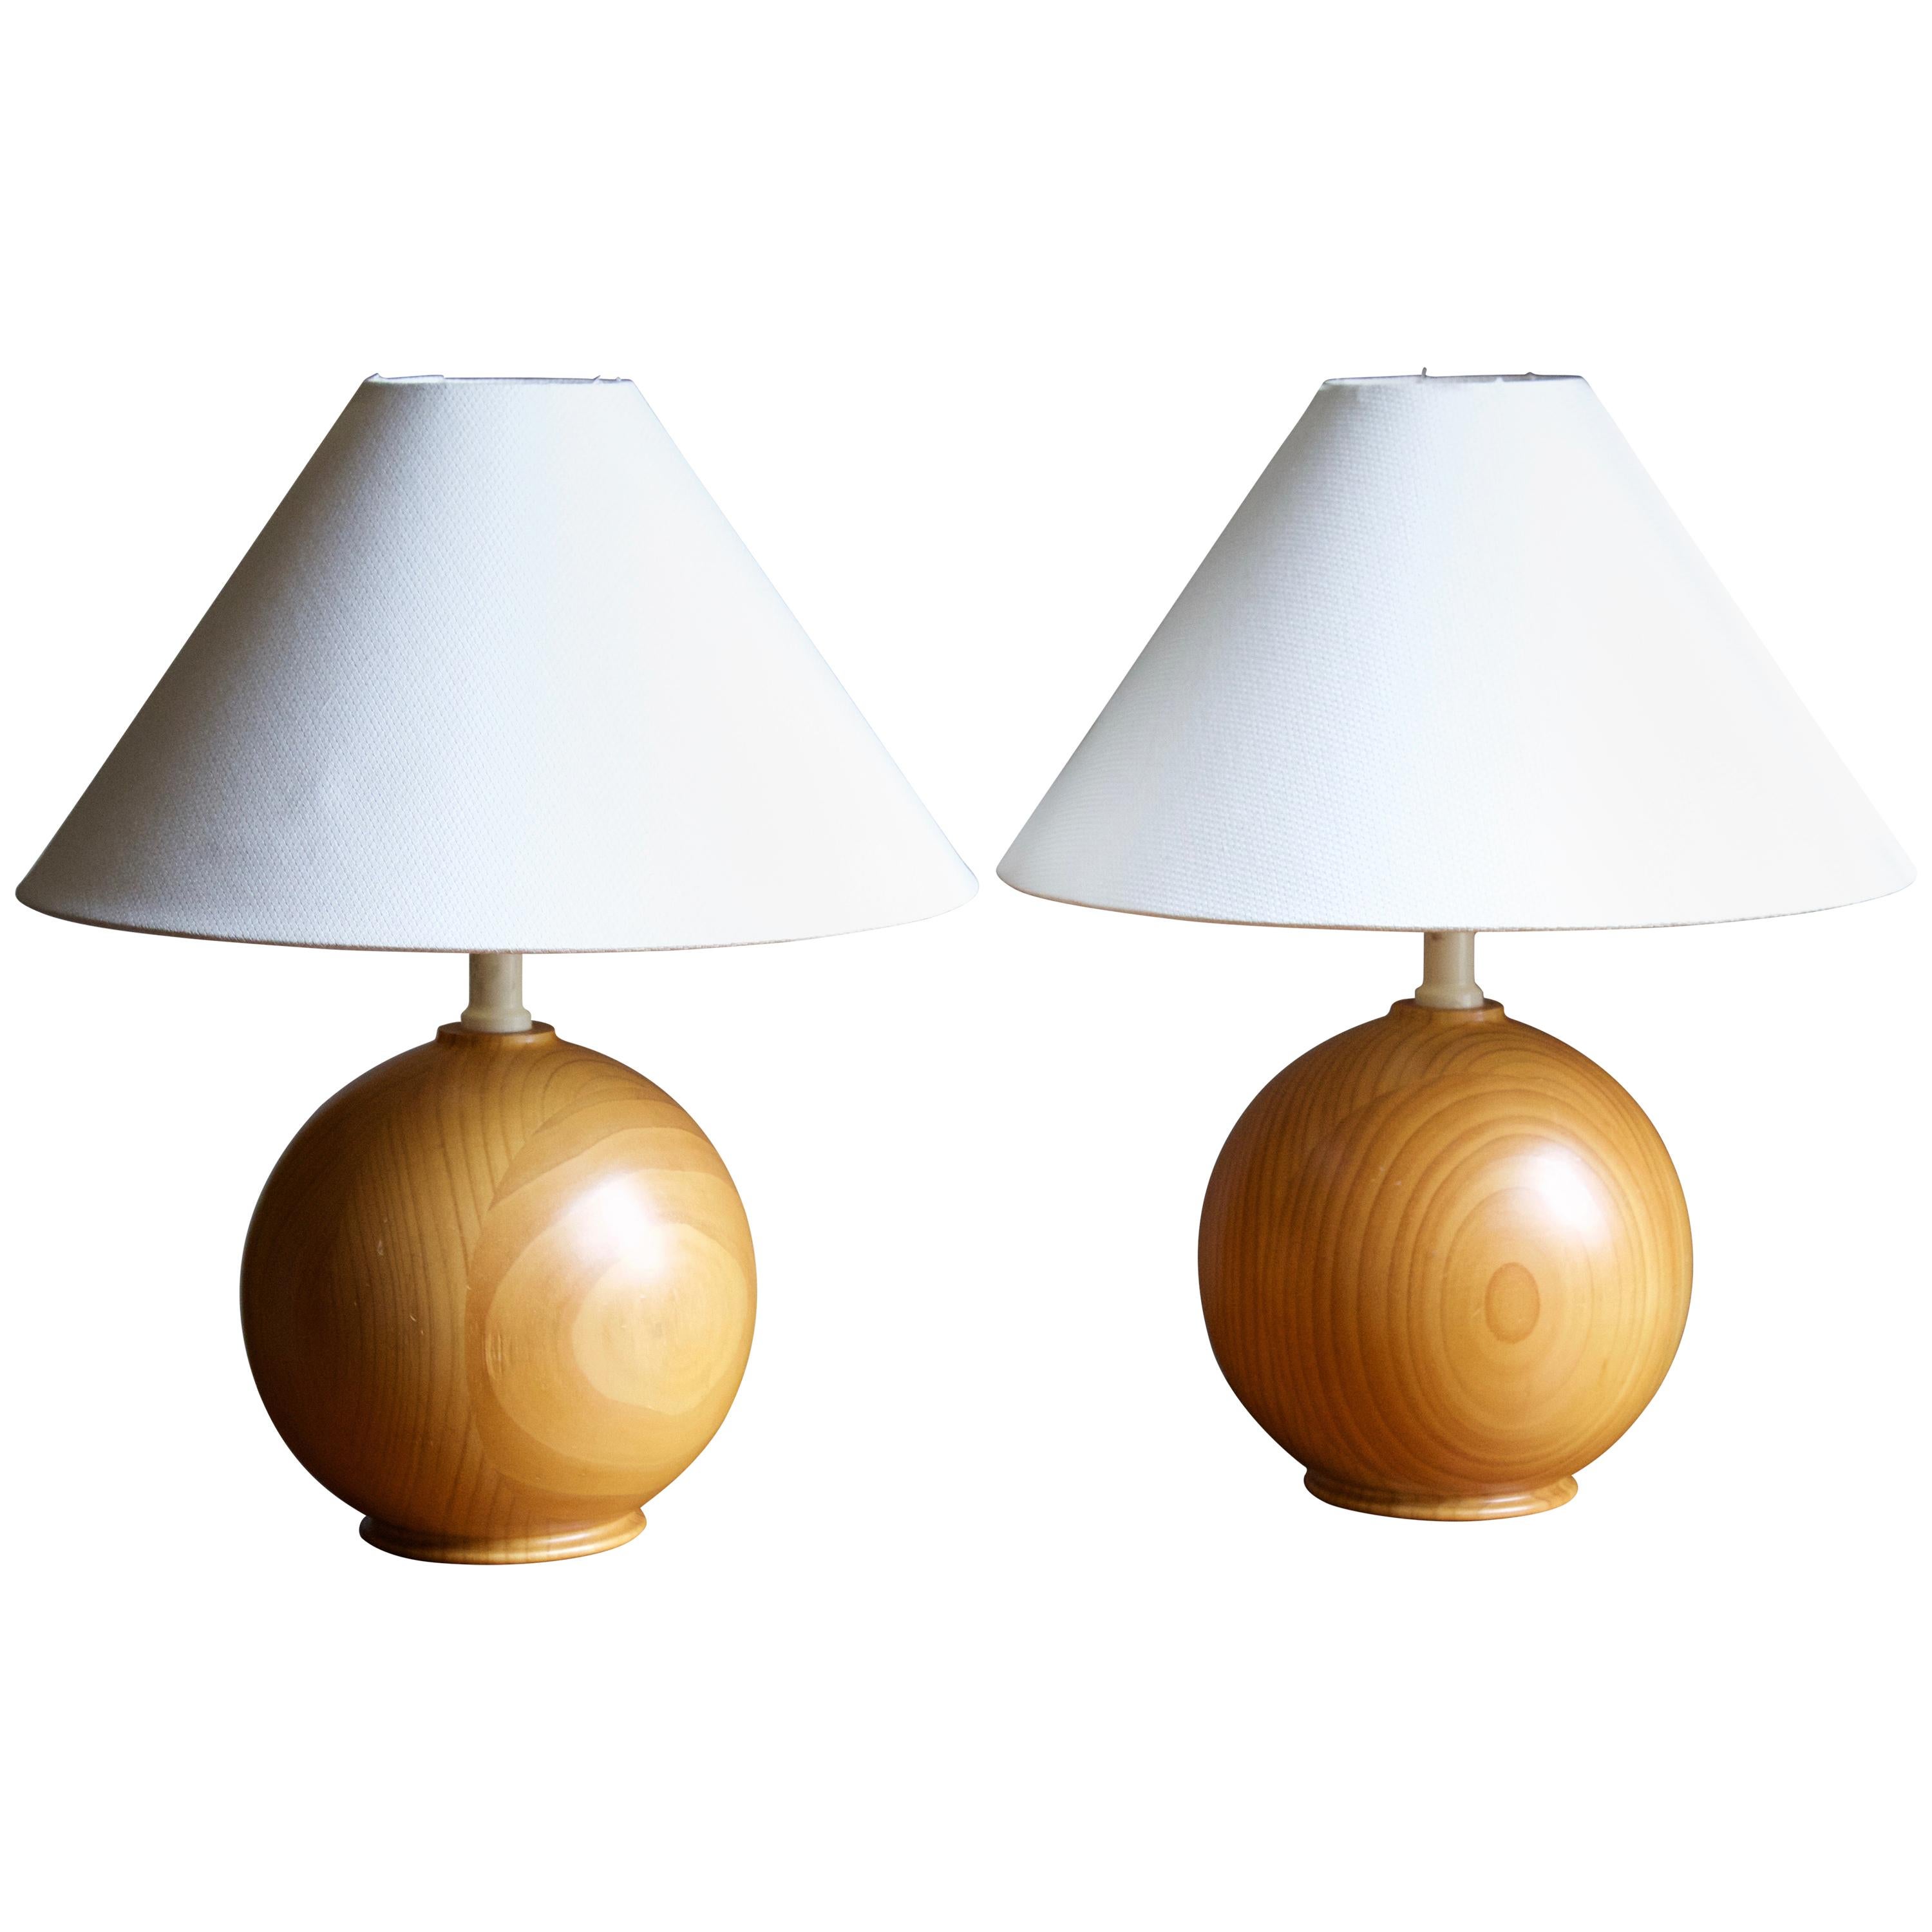 Swedish, Sculptural Table Lamps, Solid Pine, Sweden, 1970s